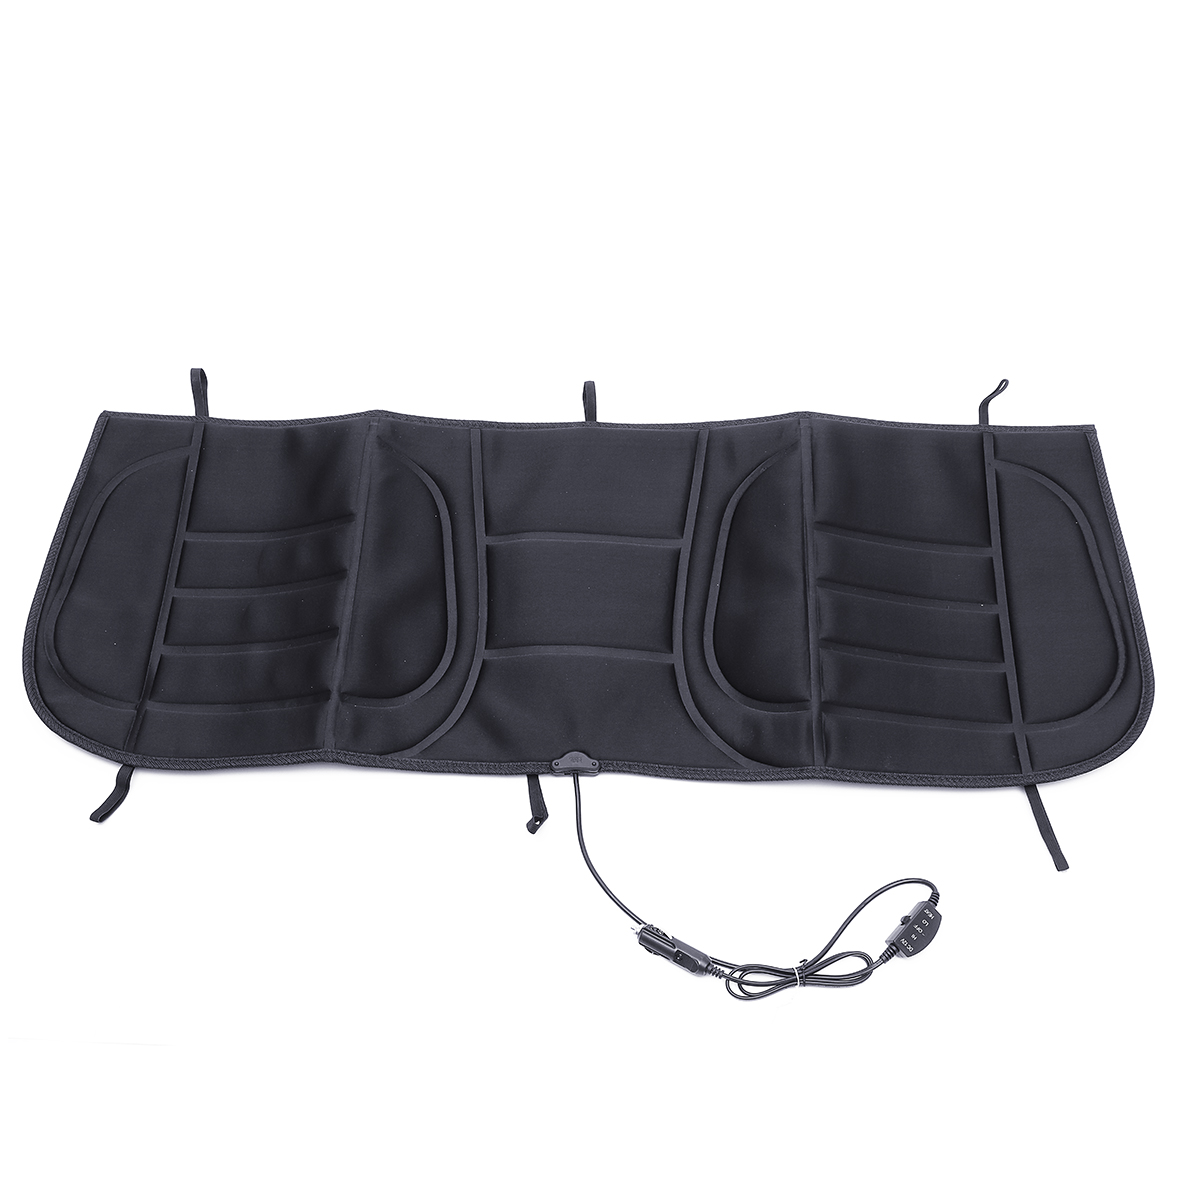 12V-Car-Rear-Seat-Heated-Cushion-Seat-Warmer-Winter-Household-Cover-Electric-Mat-1401779